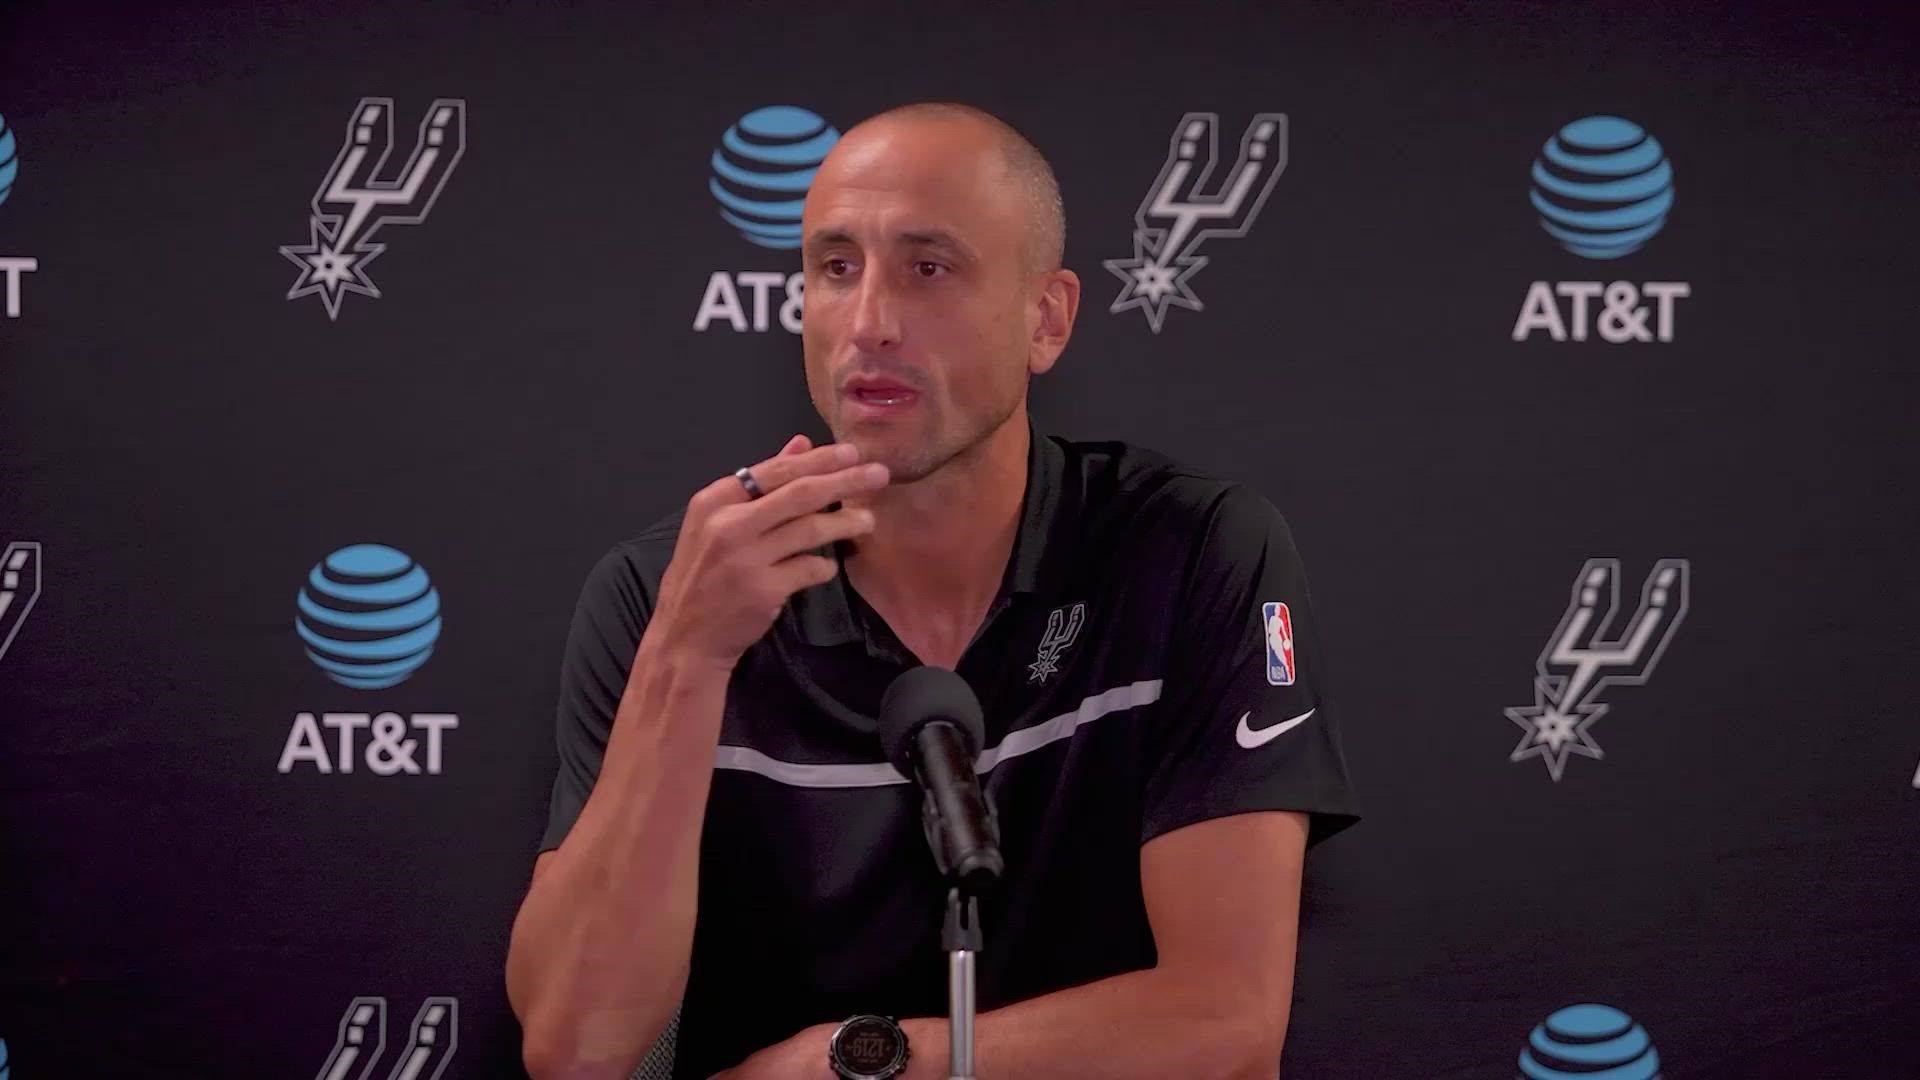 Ginobili spoke about how throughout his career, he began to see more and more international players making rosters and soaring up draft boards.